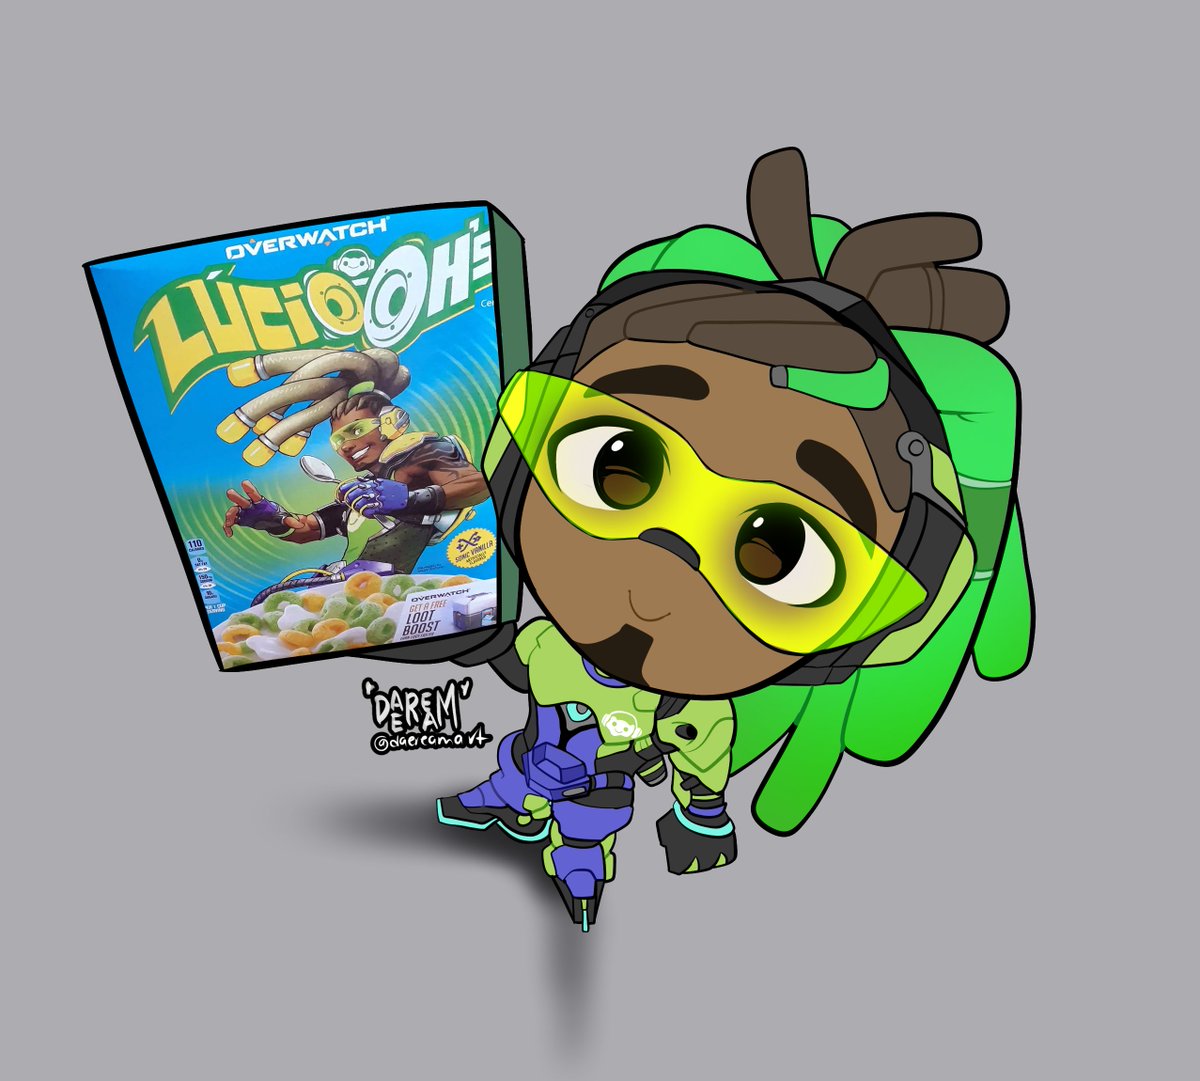 HAVE SOME LUCIO-OH'S OH'S!!!